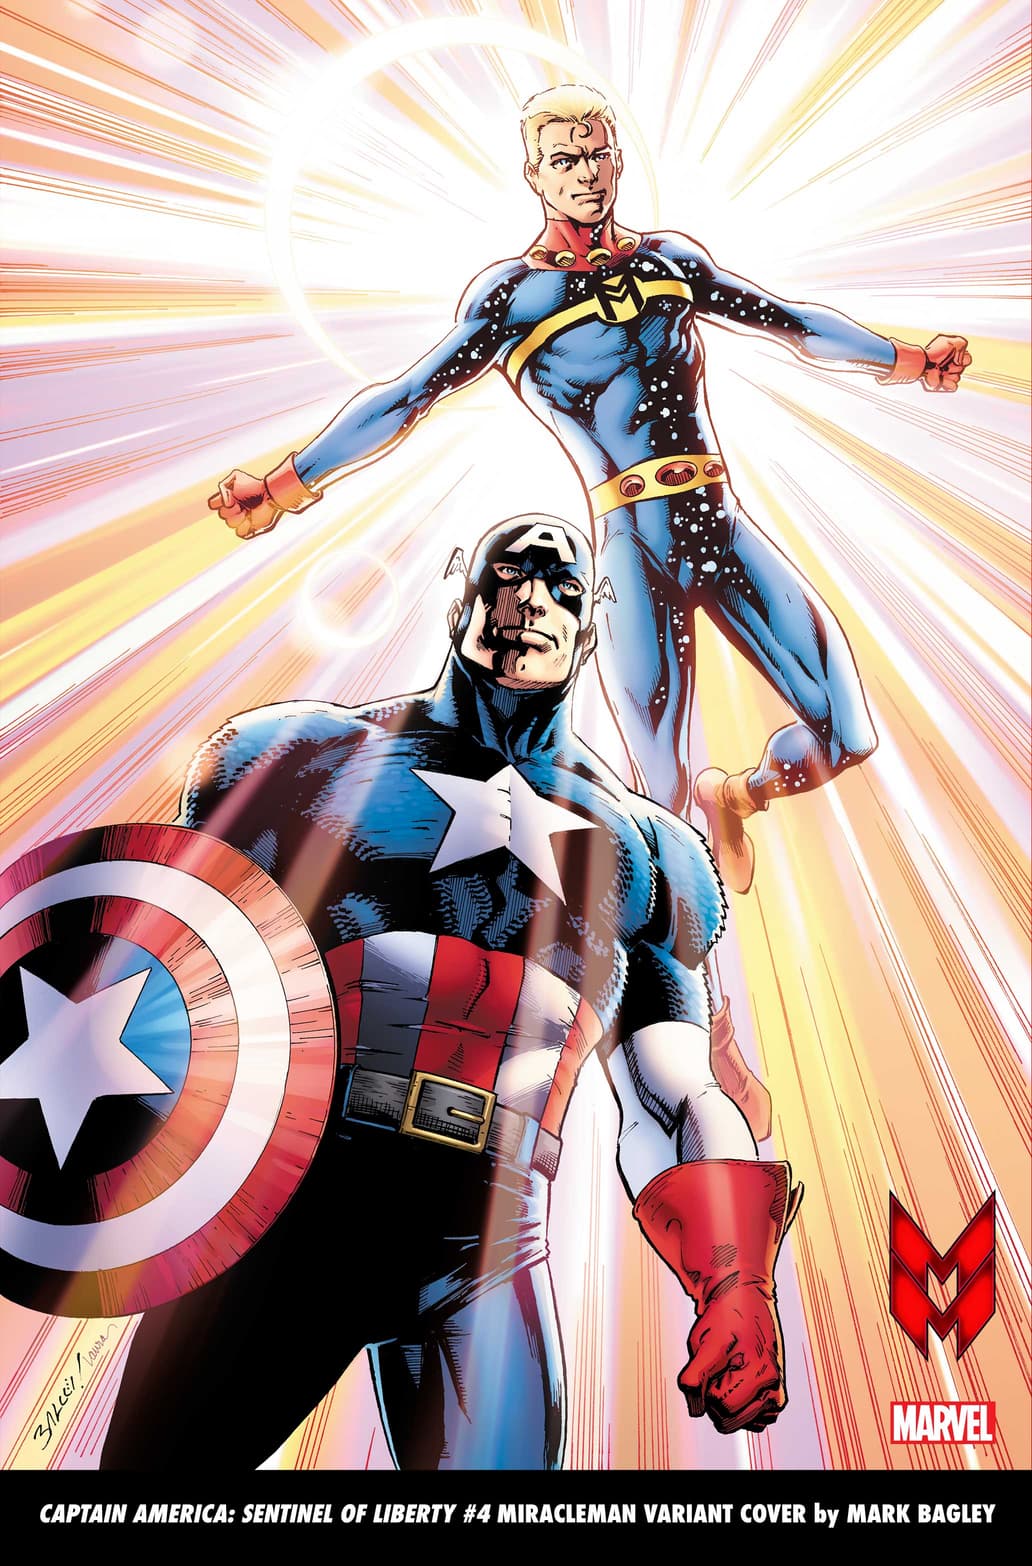 CAPTAIN AMERICA: SENTINEL OF LIBERTY #4 Miracleman Variant Cover by Mark Bagley